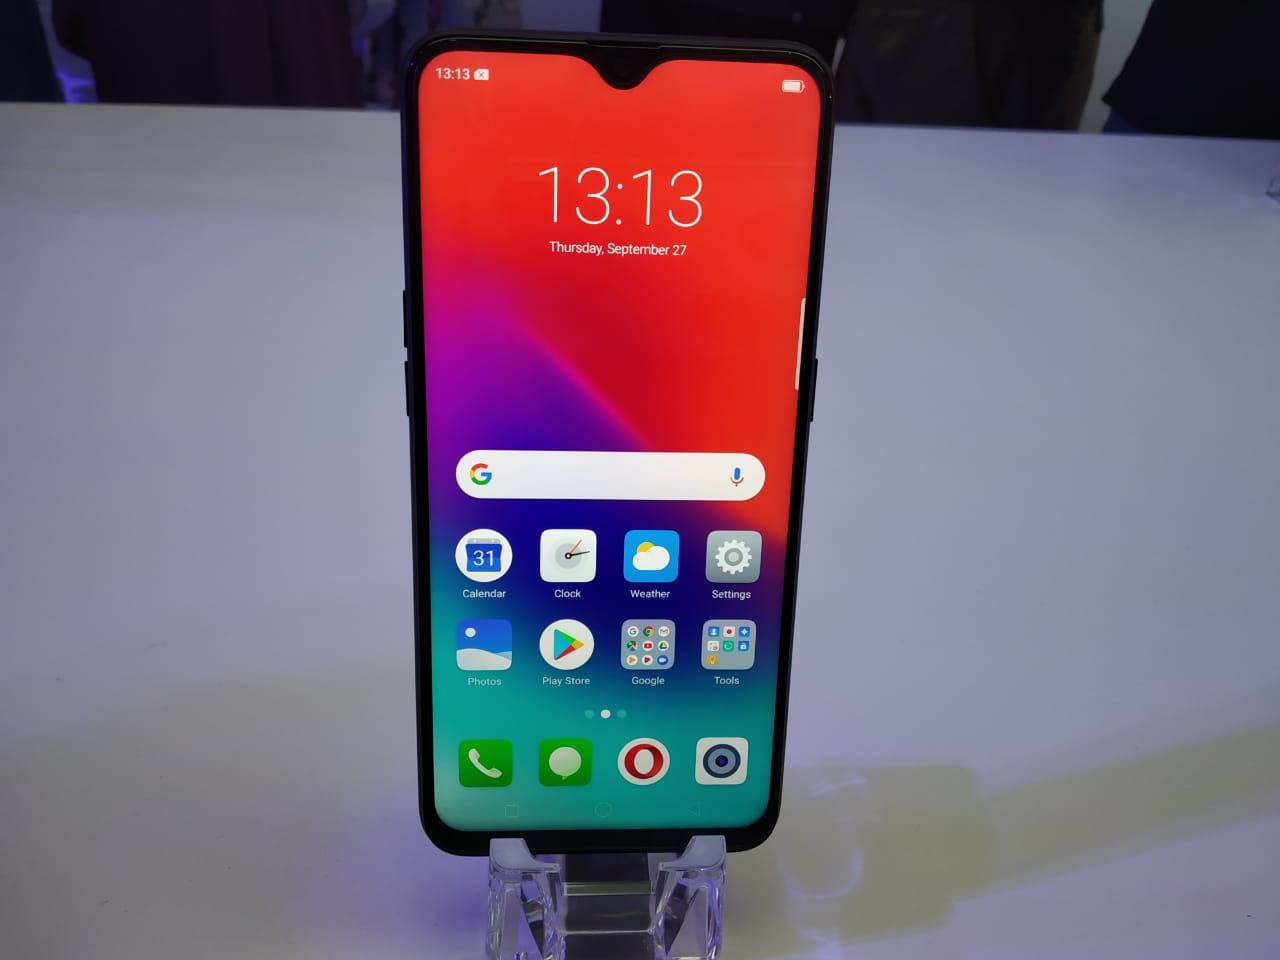 Realme launches the Flipkart-exclusive Realme 2 Pro in India at Rs. 13,990